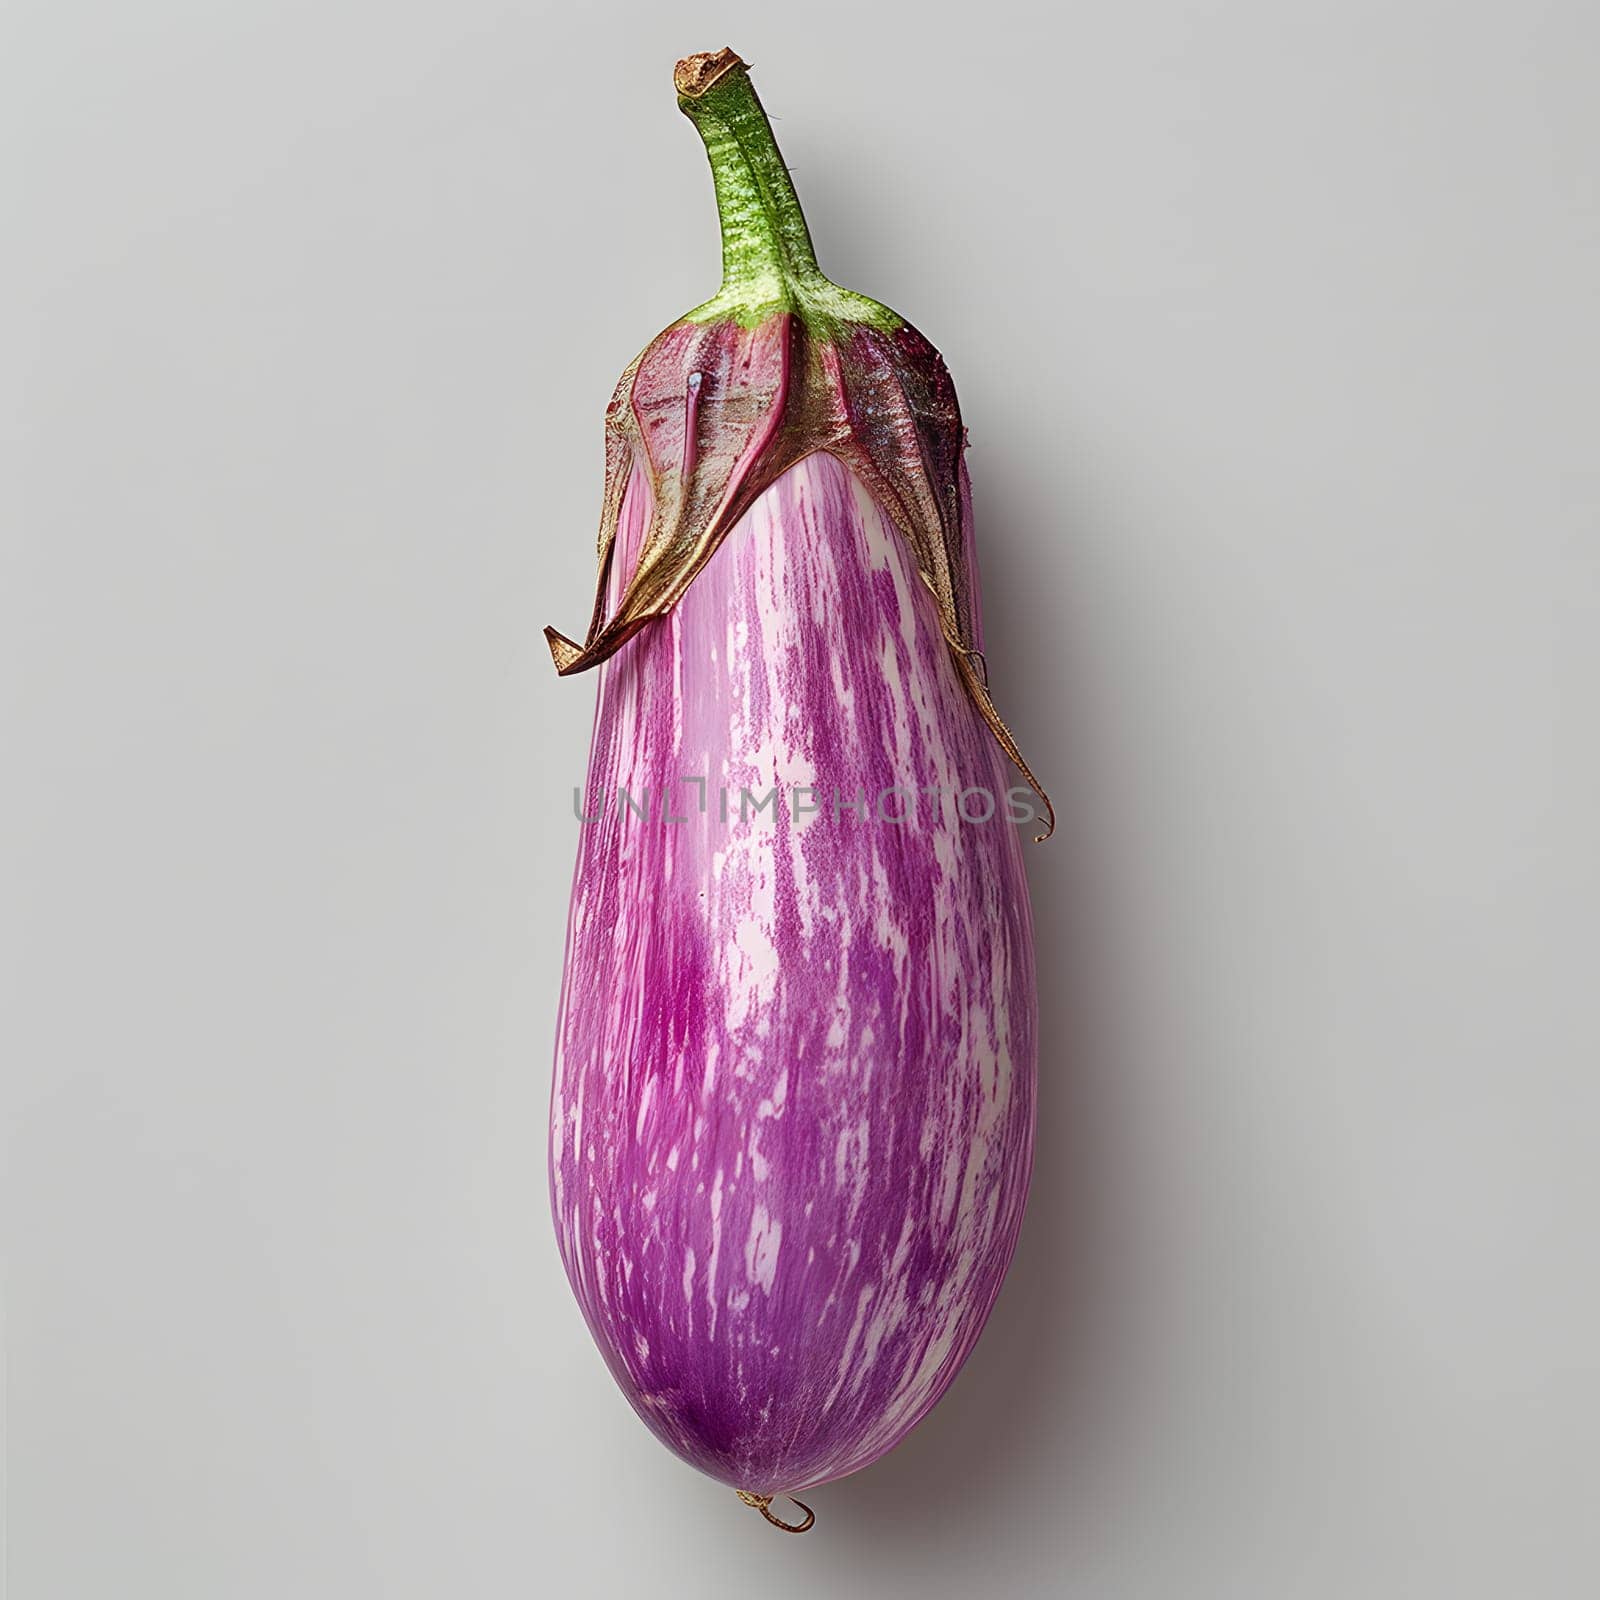 A magenta and white eggplant with a green stem is a staple food ingredient. This flowering plant, a type of vegetable, is a natural and nutritious produce from a terrestrial plant